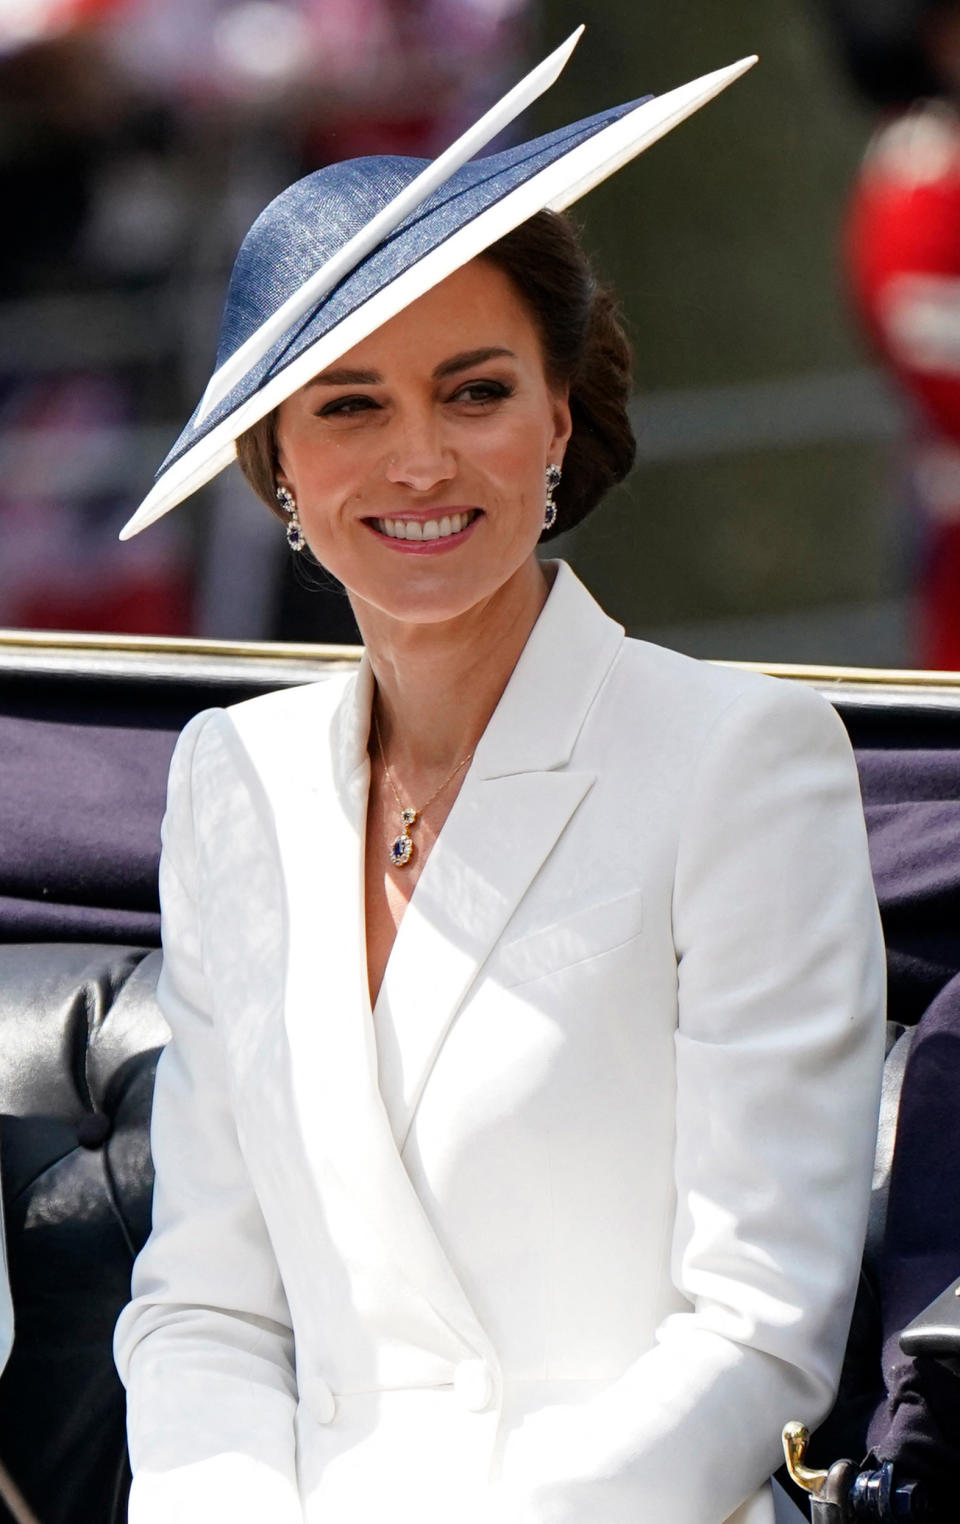 Kate Middleton's outfit at the queen's Platinum Jubilee celebration was nothing short of chic and fabulous. (Andrew Matthews / Pool via Getty Images)